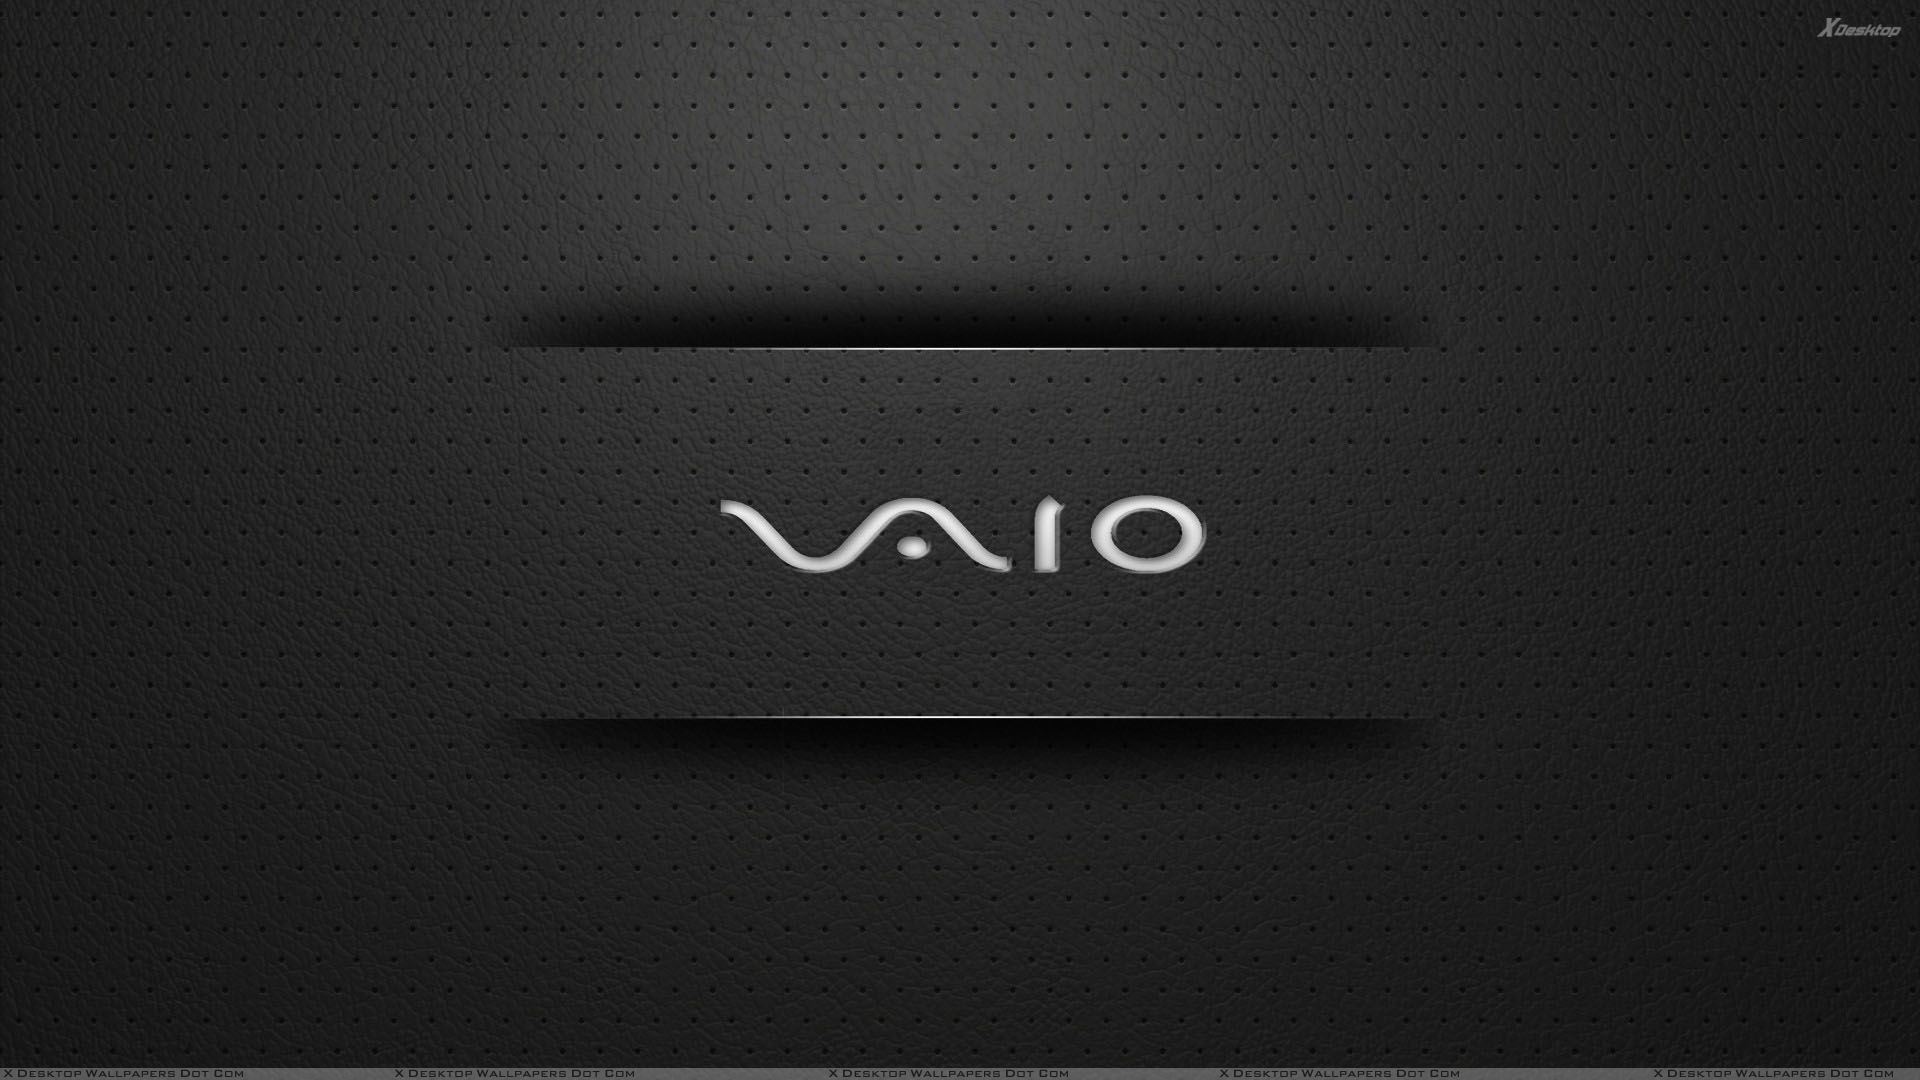 Free Download Sony Vaio Logo On Black Dotted Background Wallpaper 19x1080 For Your Desktop Mobile Tablet Explore 49 Sony Vaio Wallpaper Backgrounds Sony Vaio Wallpapers Sony Vaio Wallpaper 1366x768